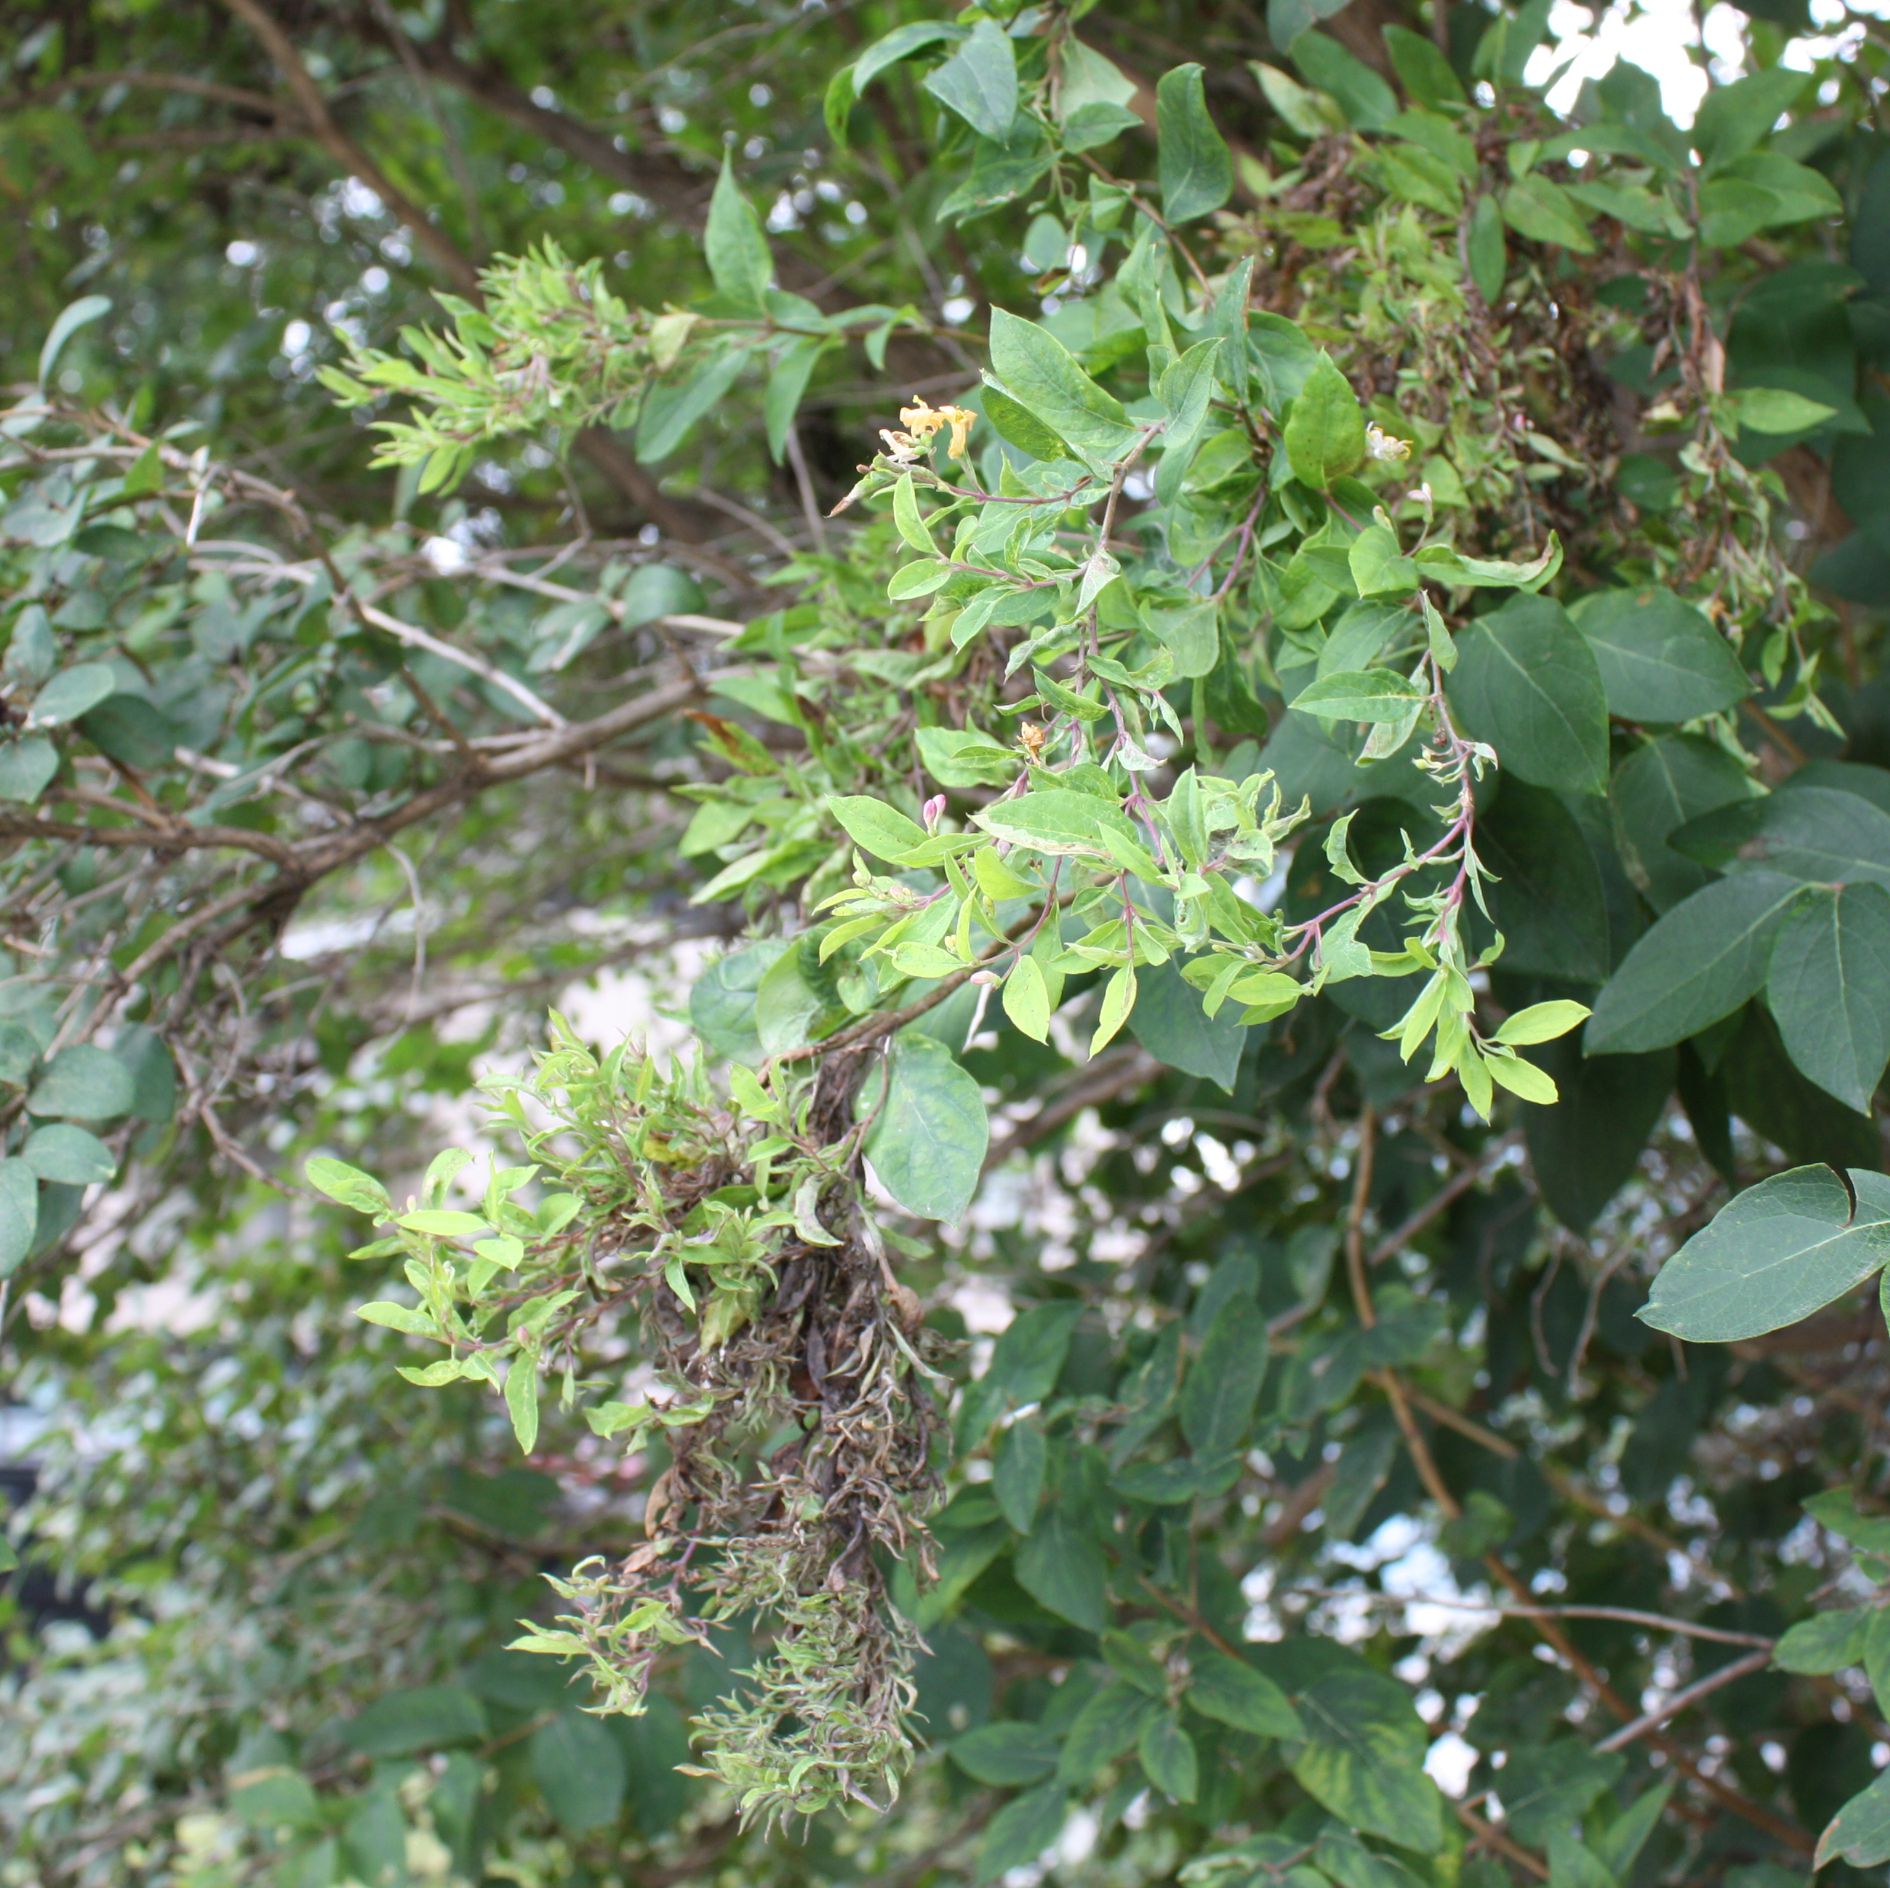 A shrub branch with masses of small, thin shoots dangling from it.